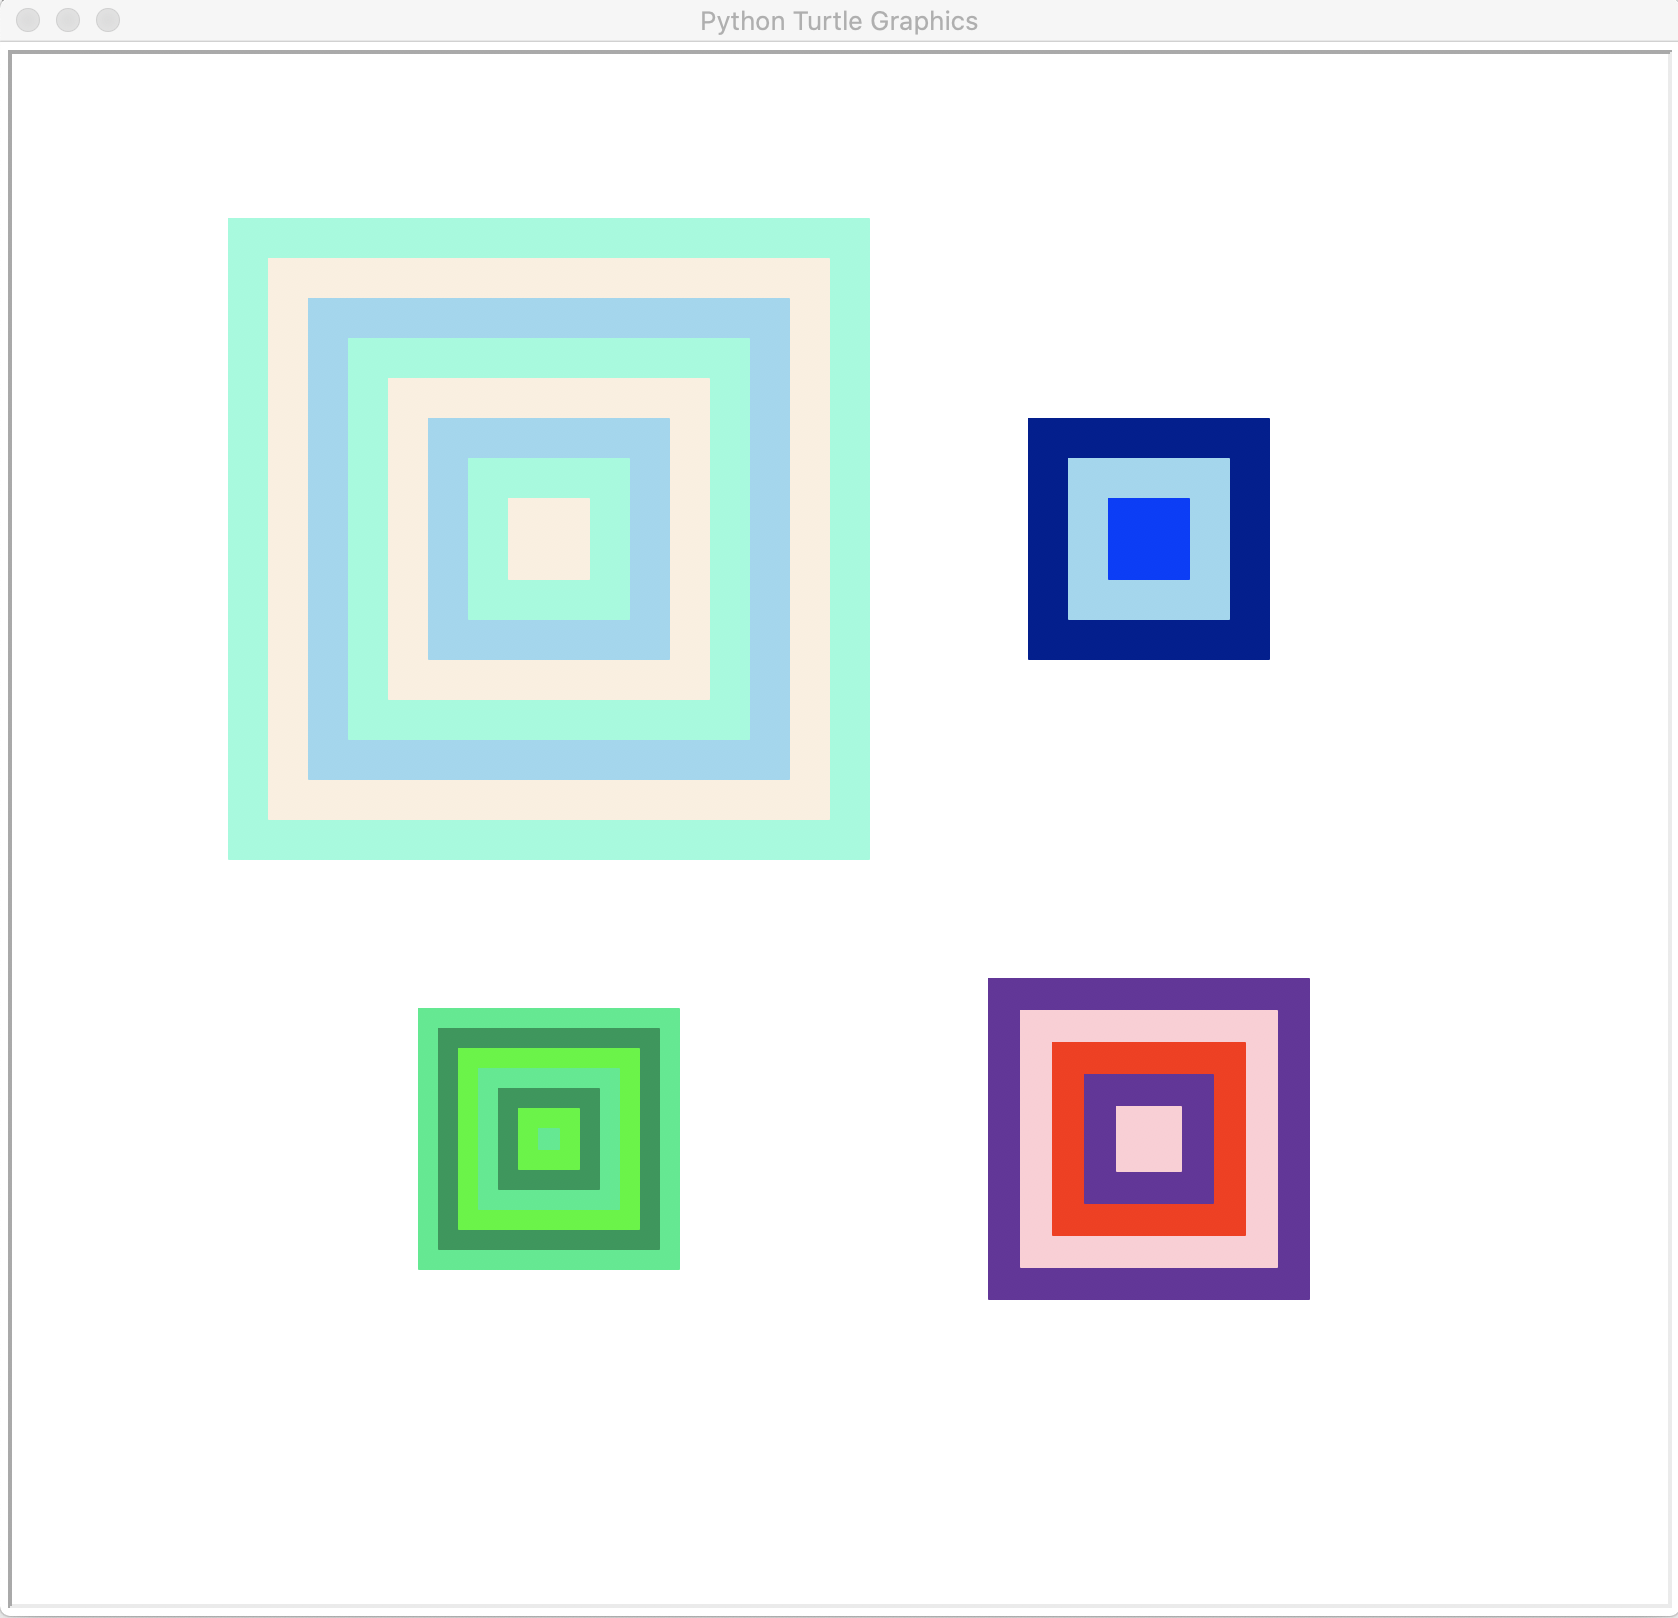 Pictures of four concentric squares using Turtle graphics